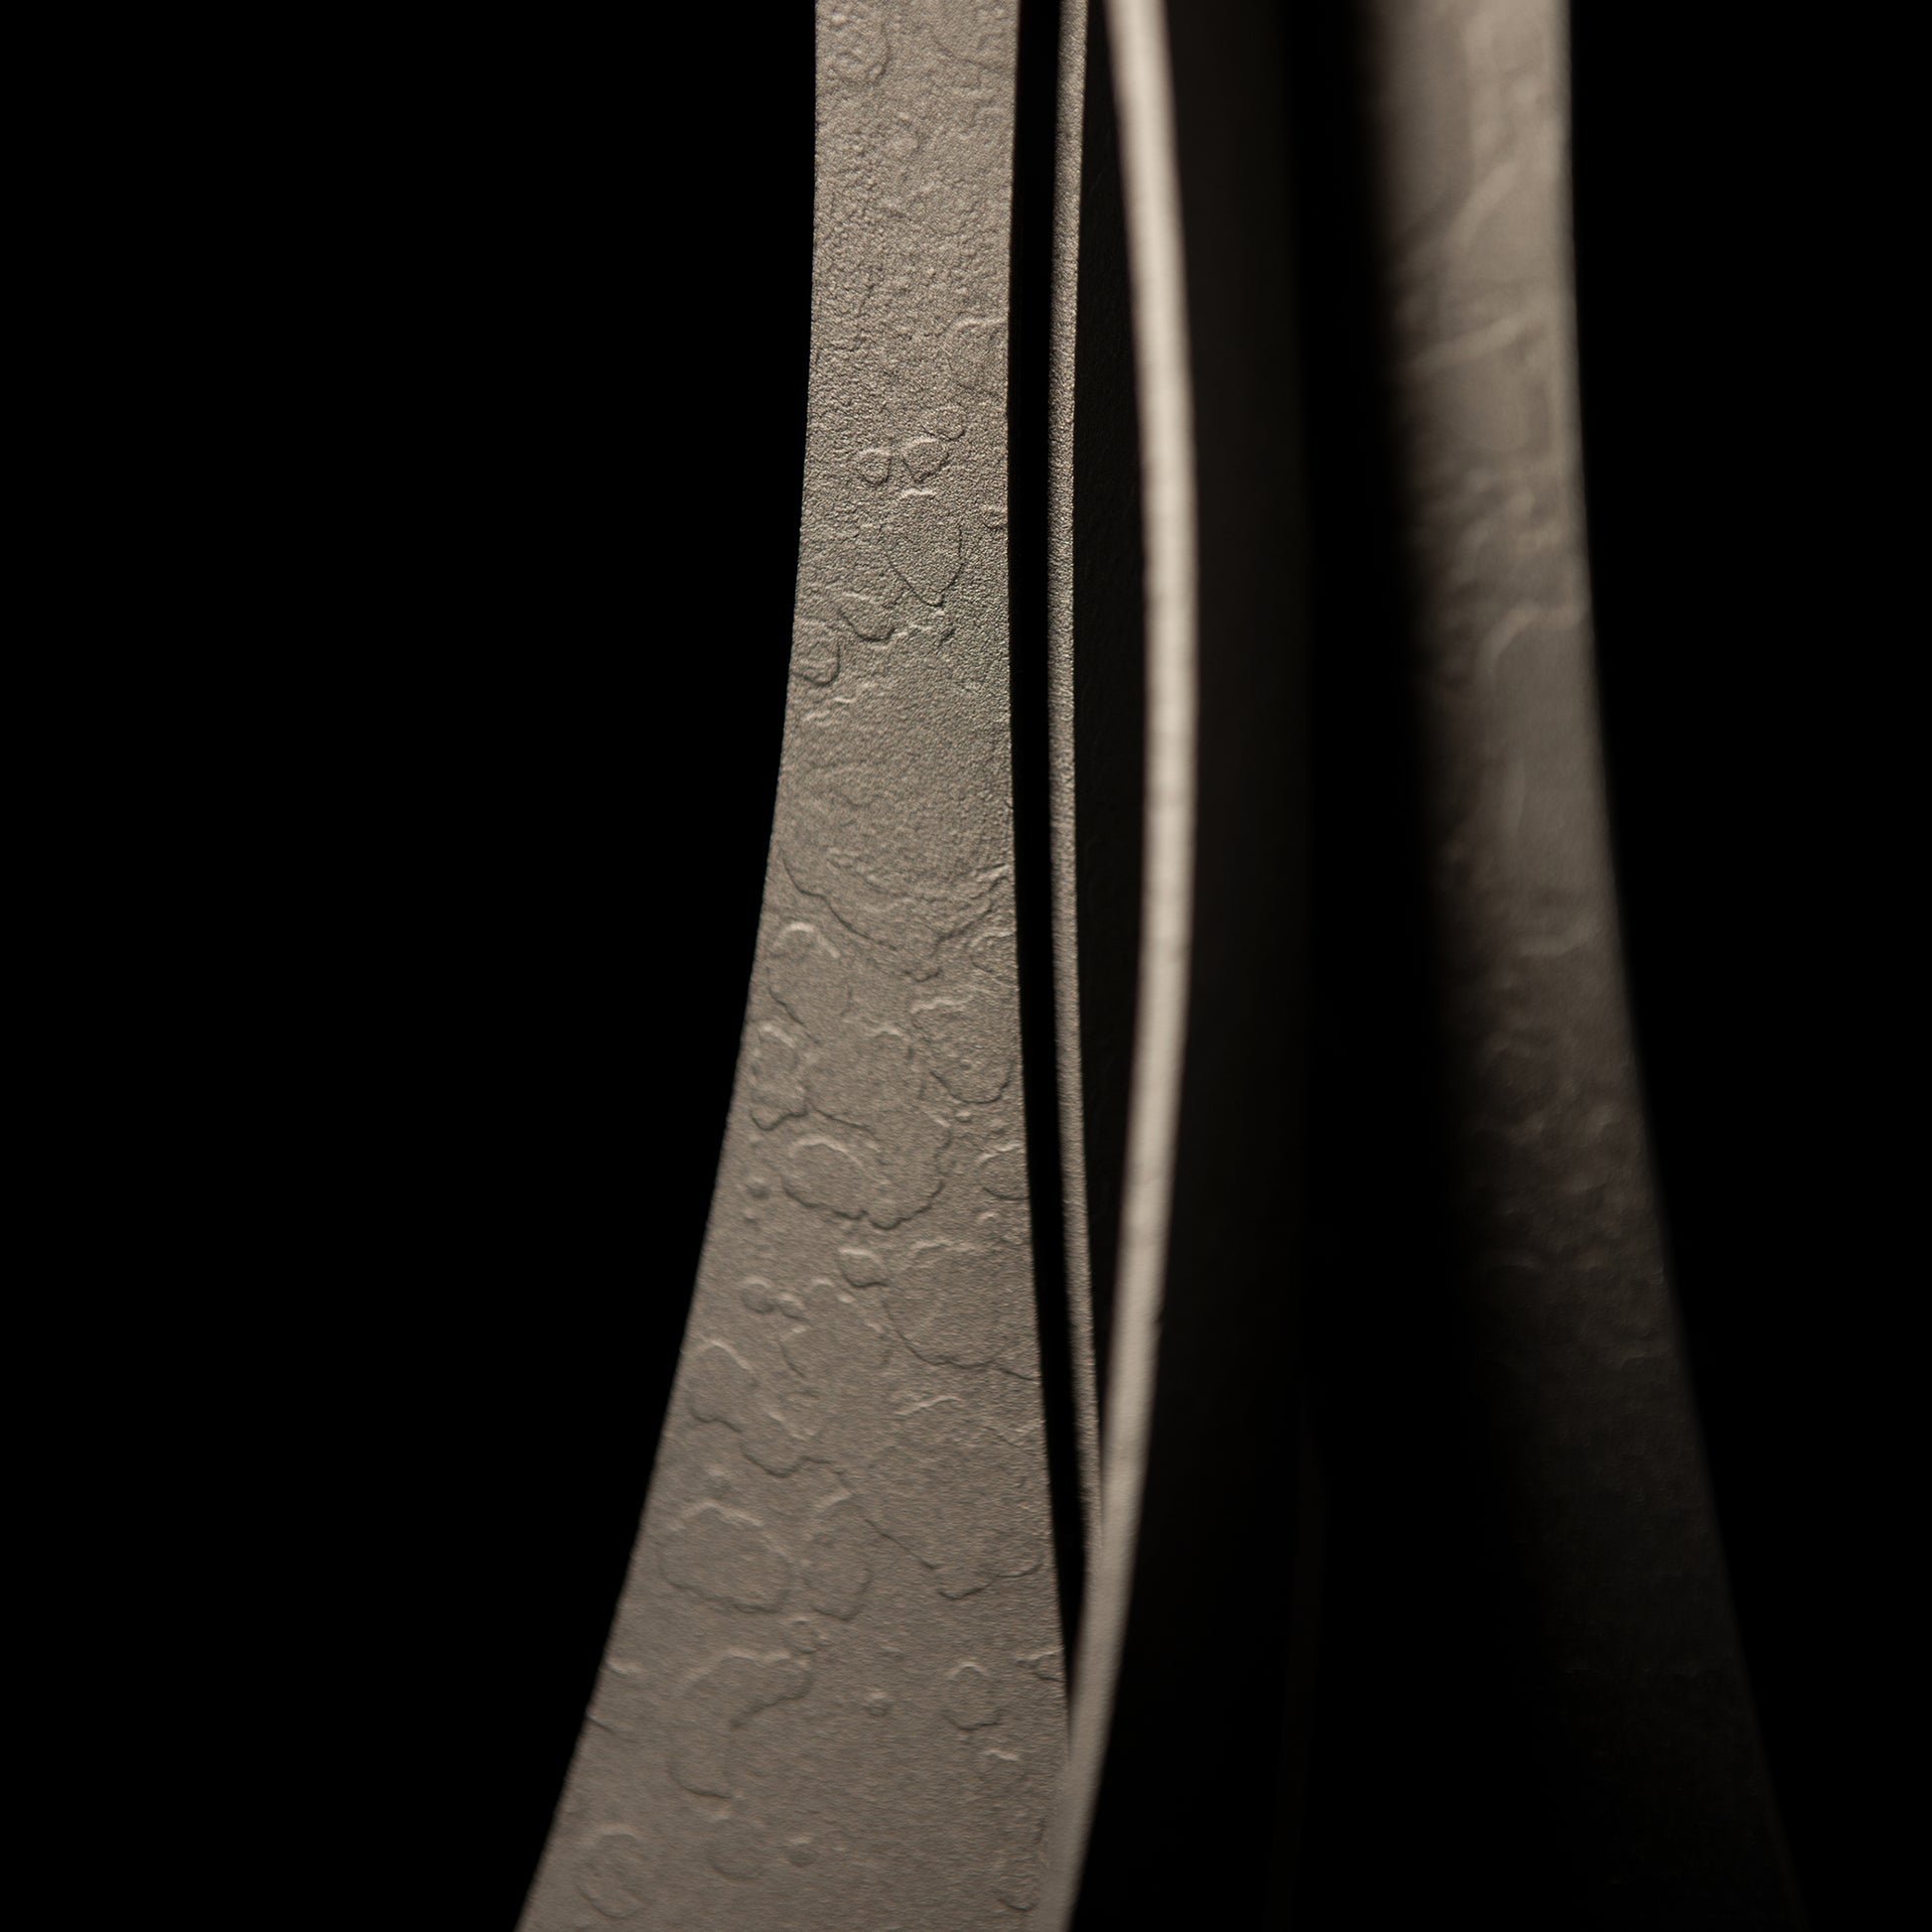 Close-up of a hand-crafted Hubbardton Forge Moreau Table Lamp in low light, creating a play of light and shadow that emphasizes the contours and details.